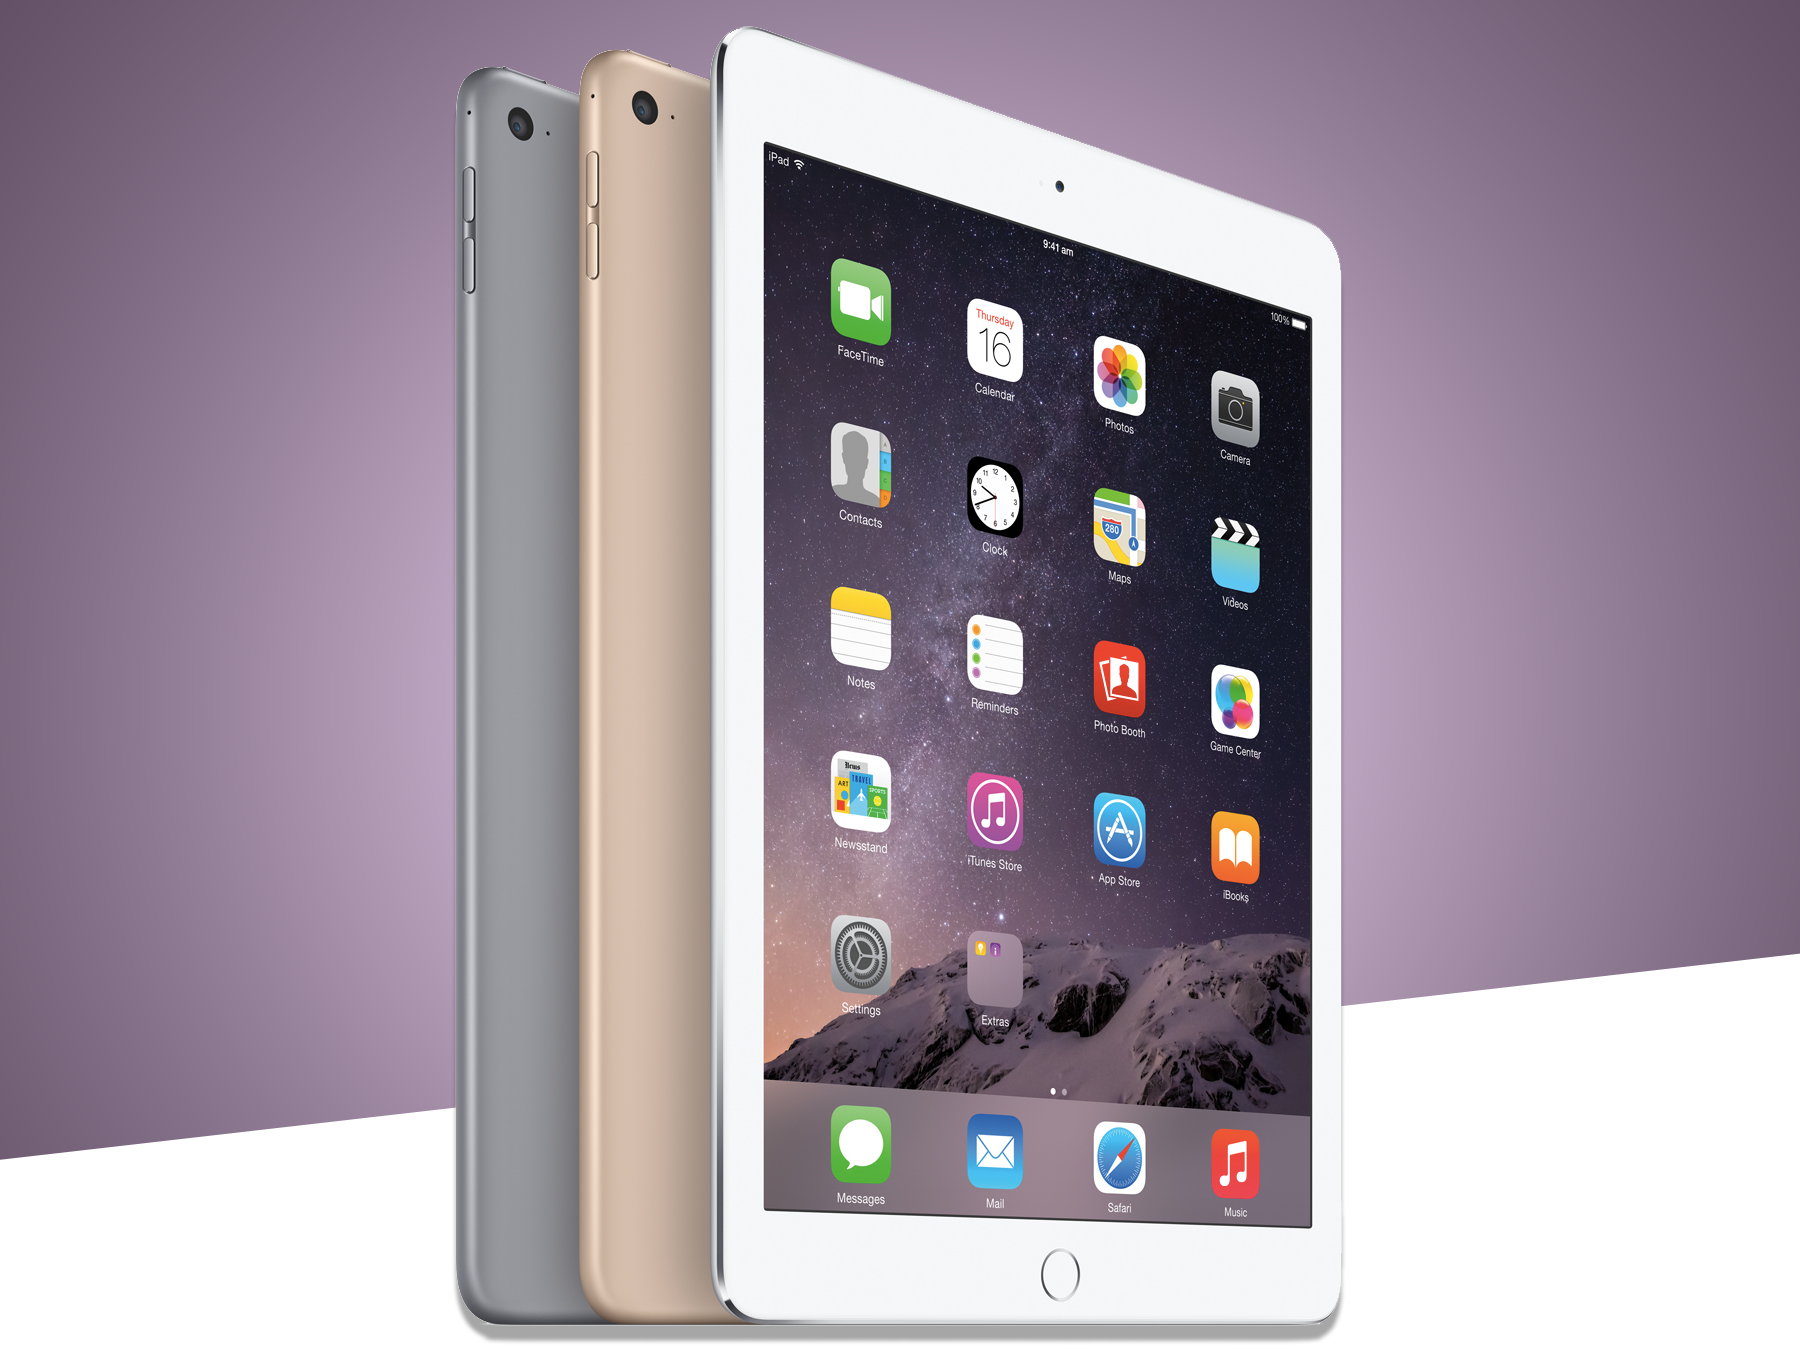 Now add this: Apple iPad Air 2